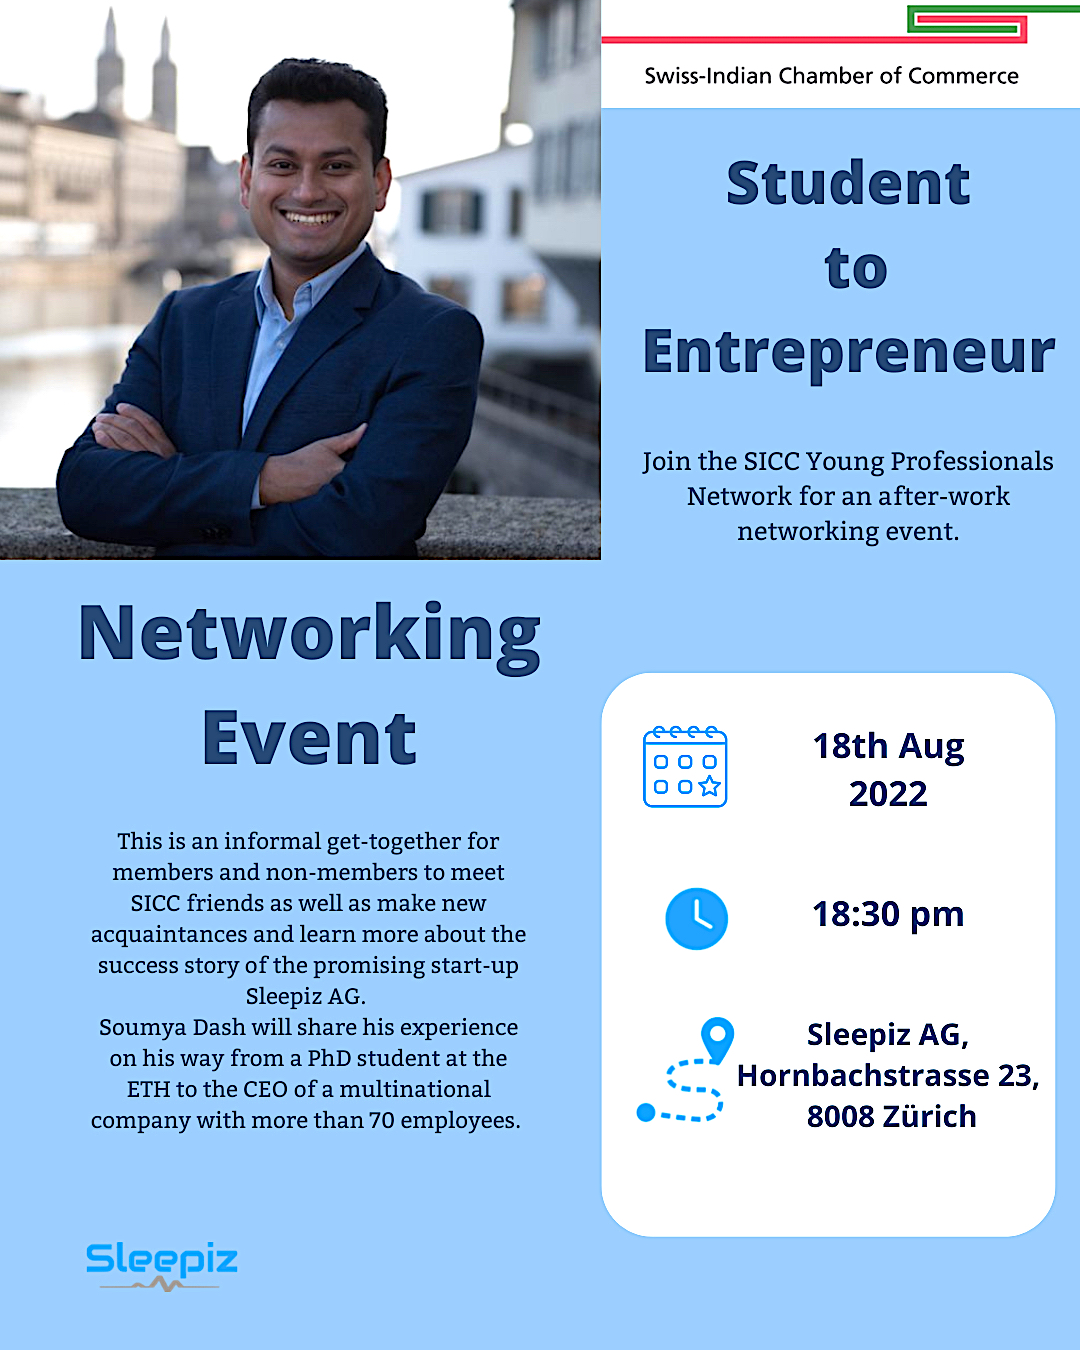 Student to Entrepreneur networking event.